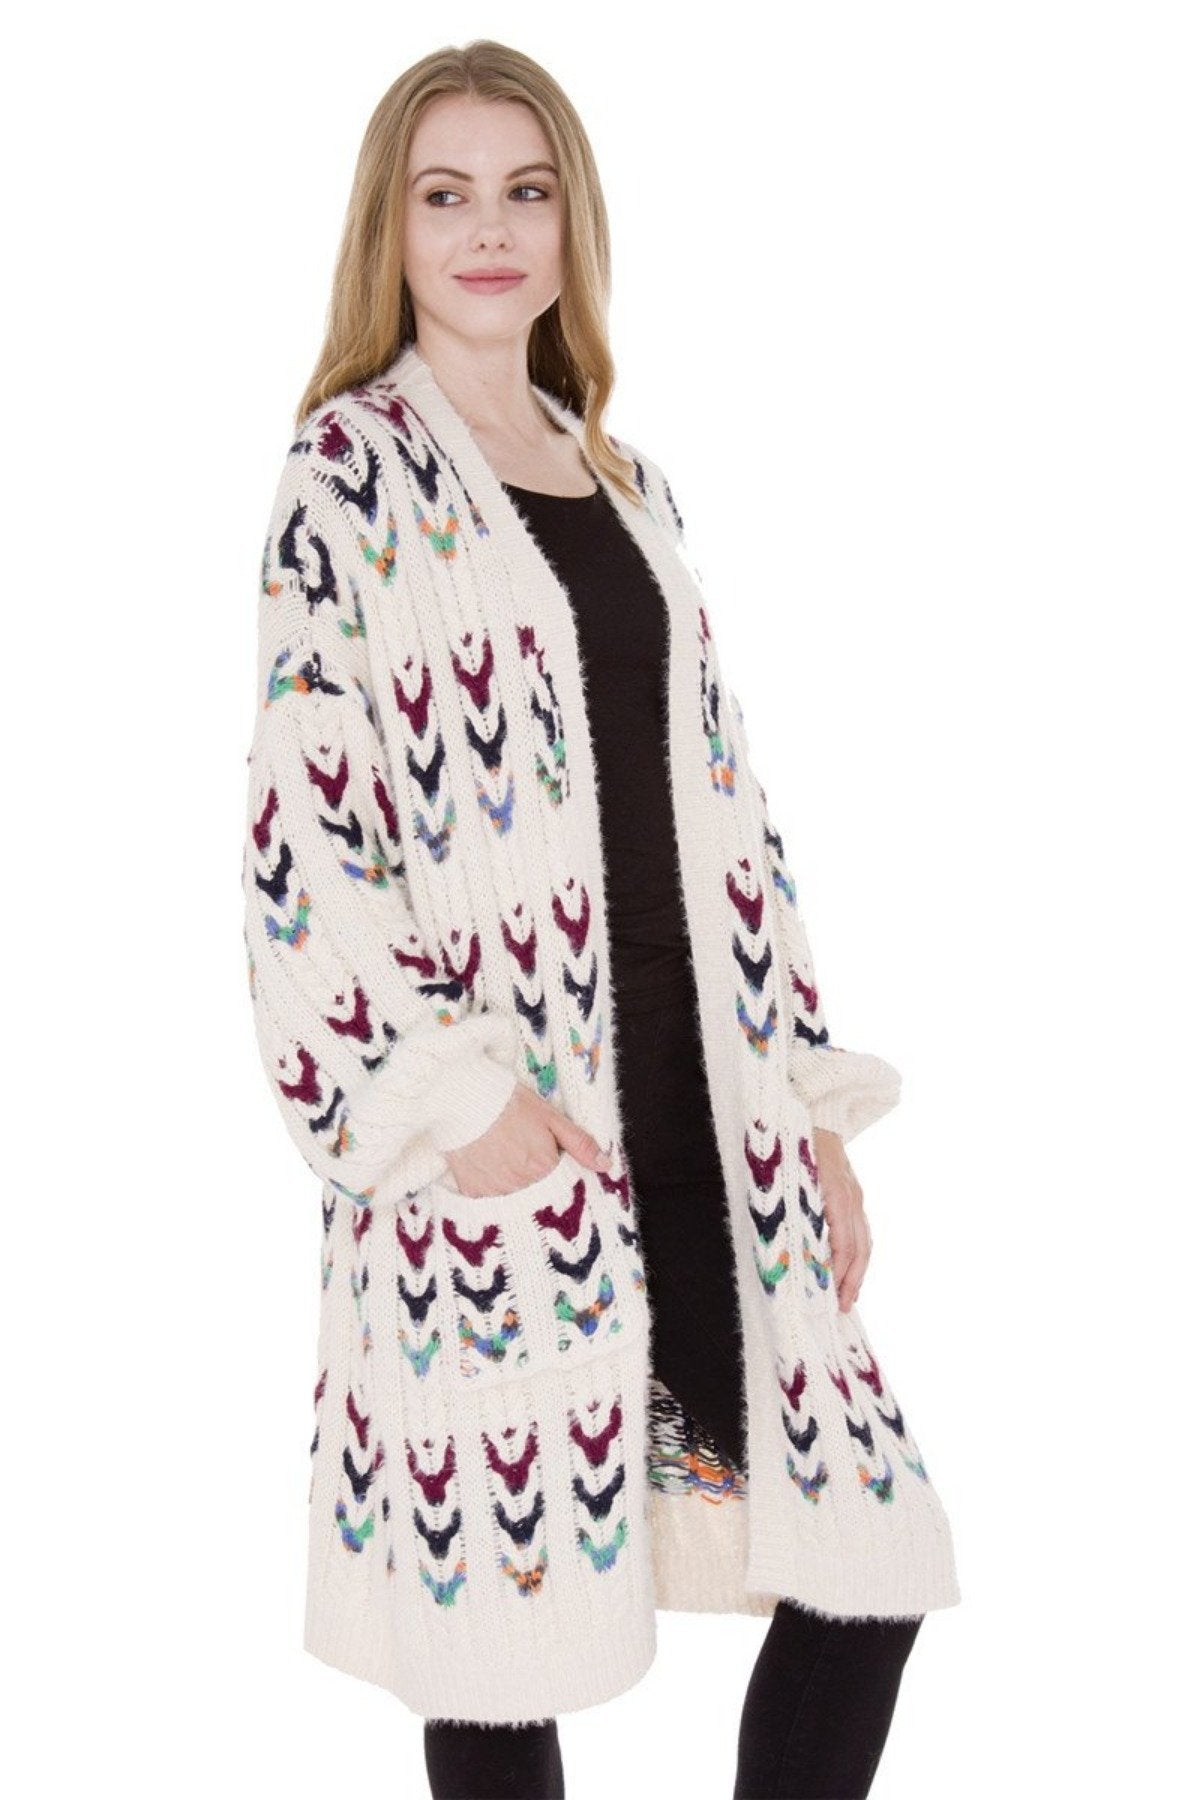 Solid Color Knitted Cardigan W/ Multi-Colored Threads, Bishop Sleeves, & Pockets 